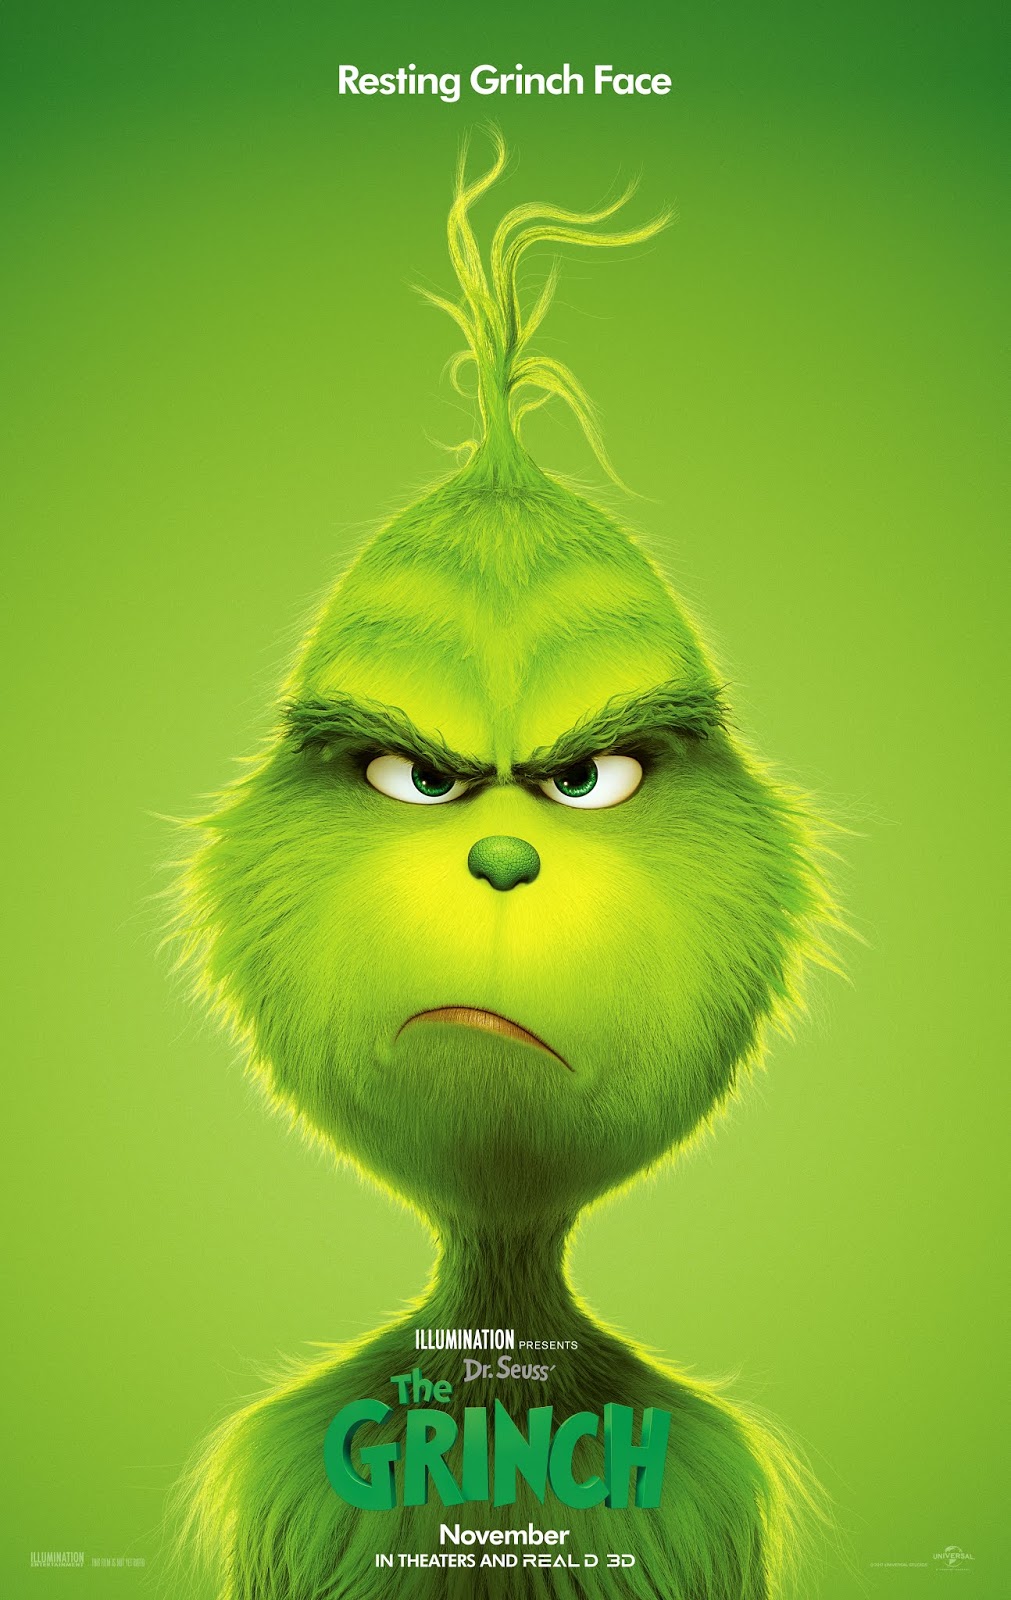 Green colored hairy grinch in a grumpy resting mood on a green background